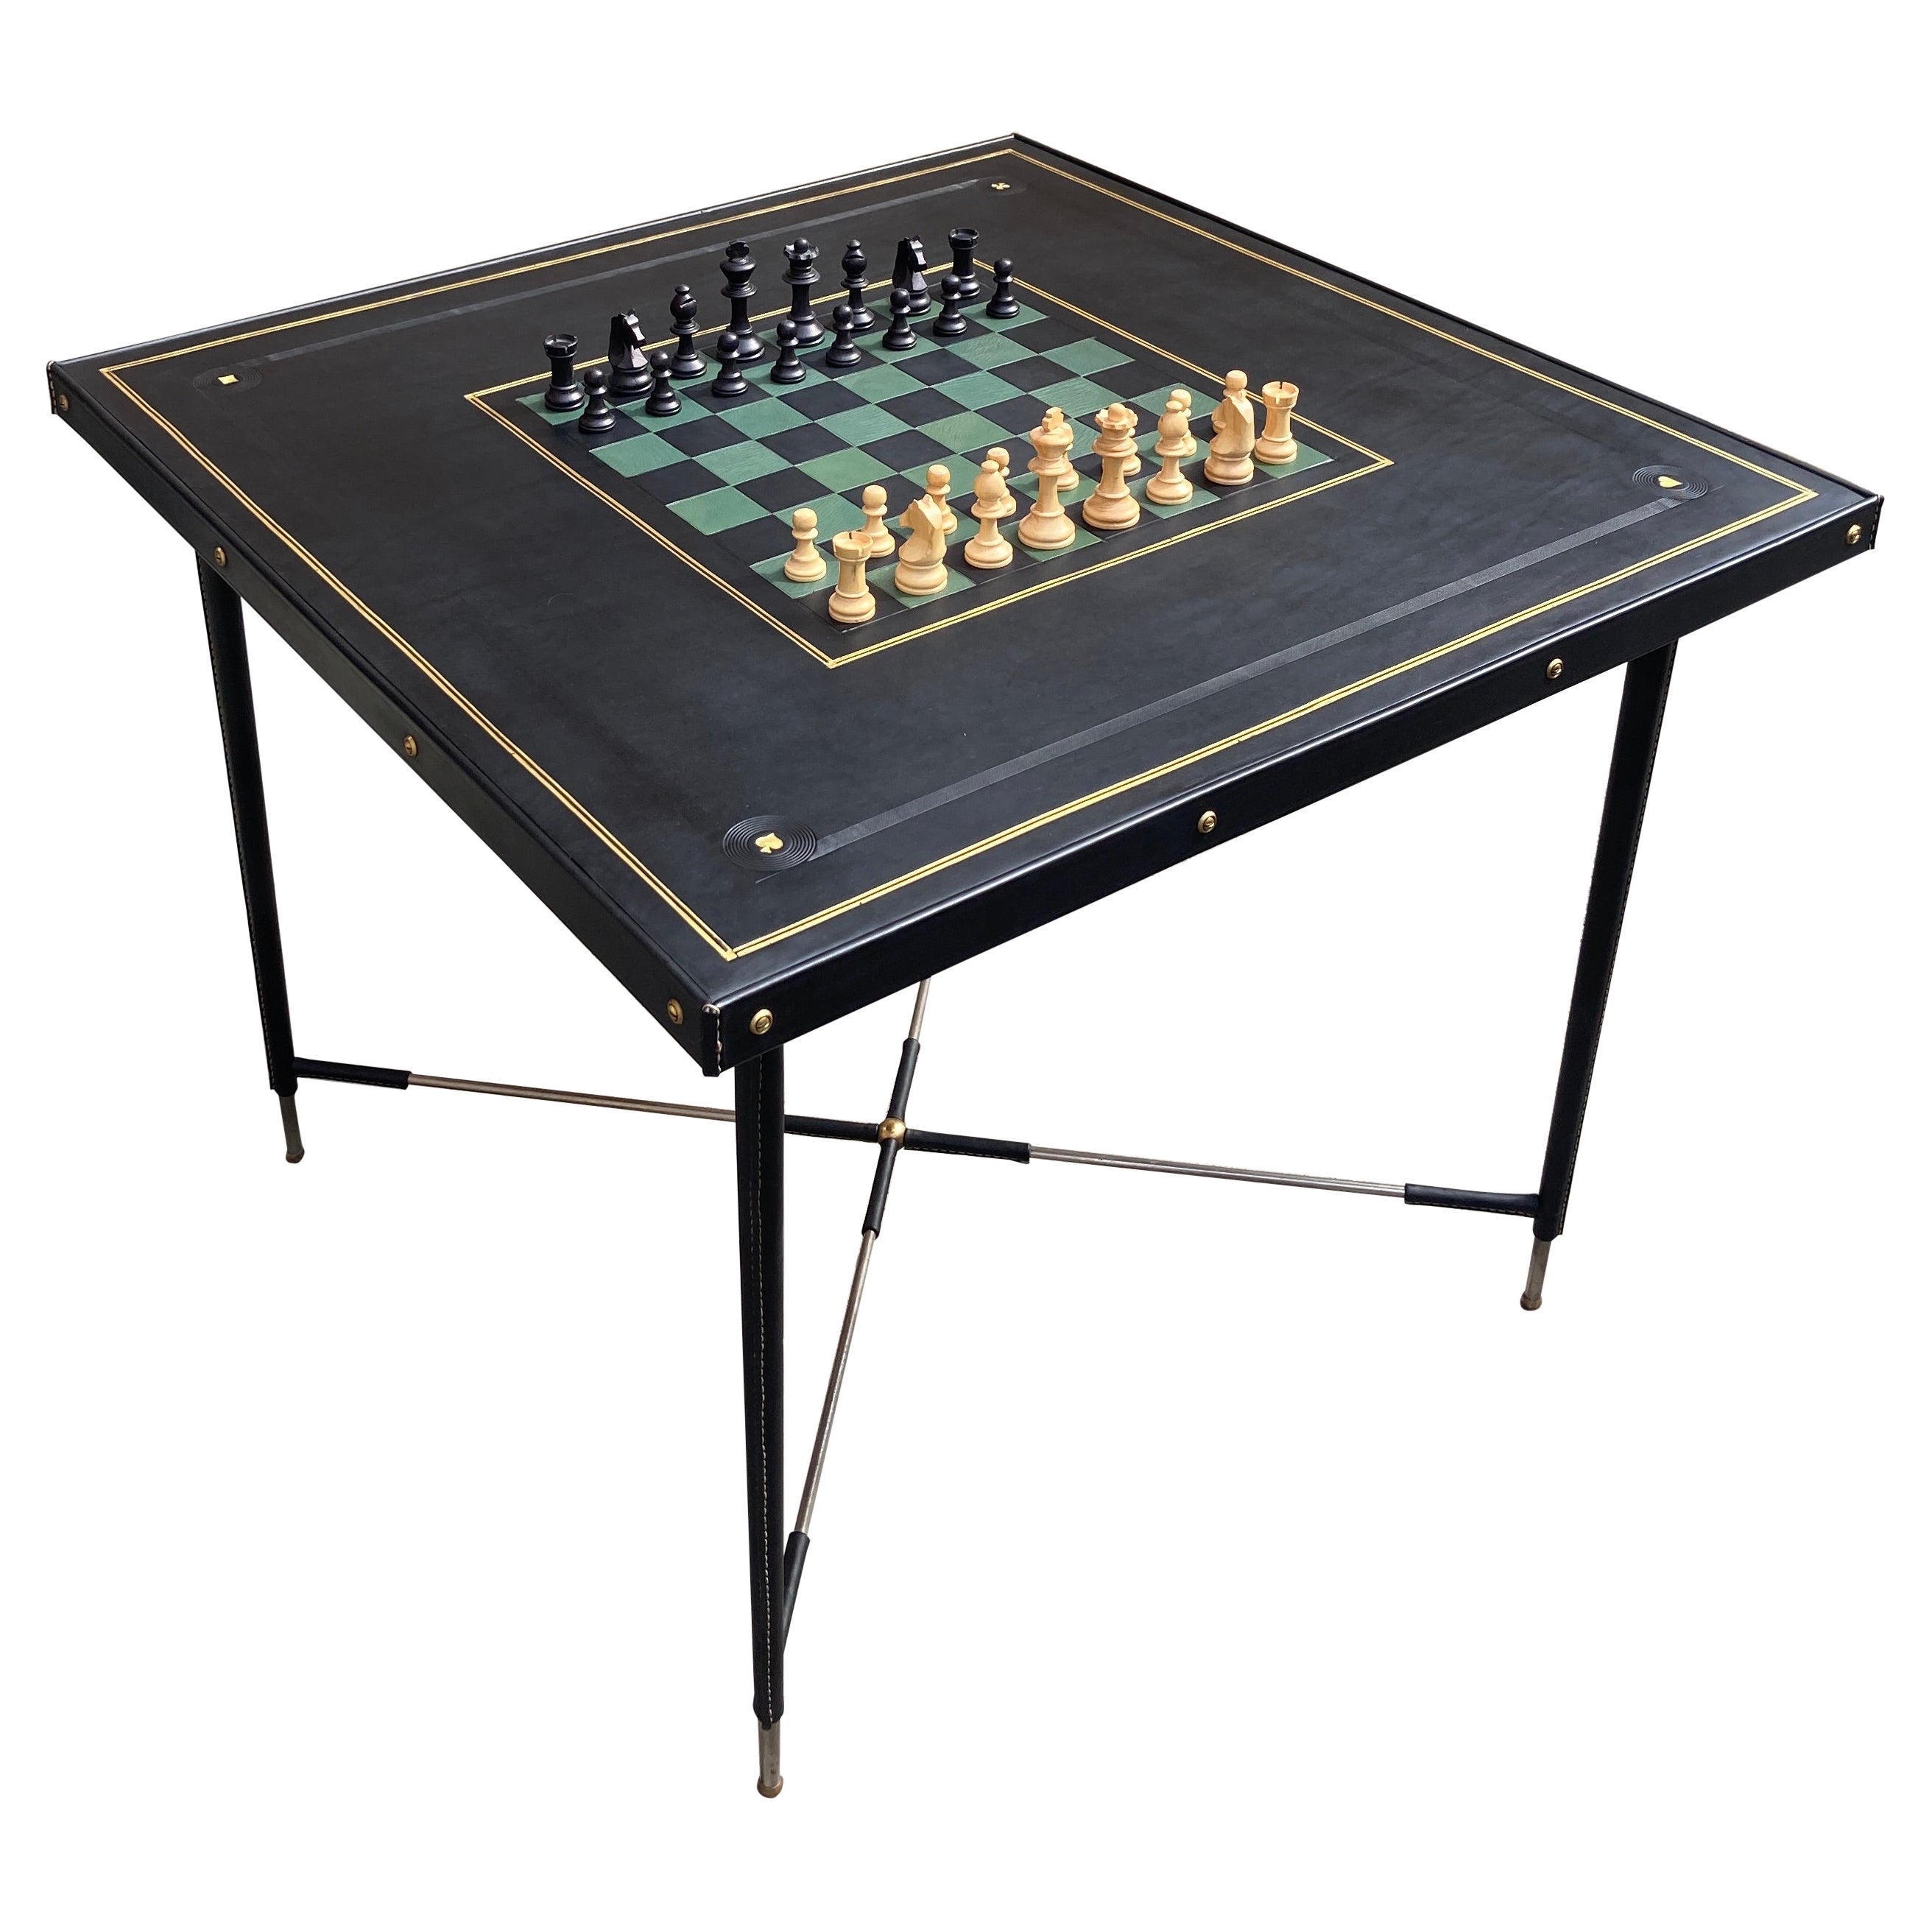 1950's stitched leather game table by Jacques Adnet